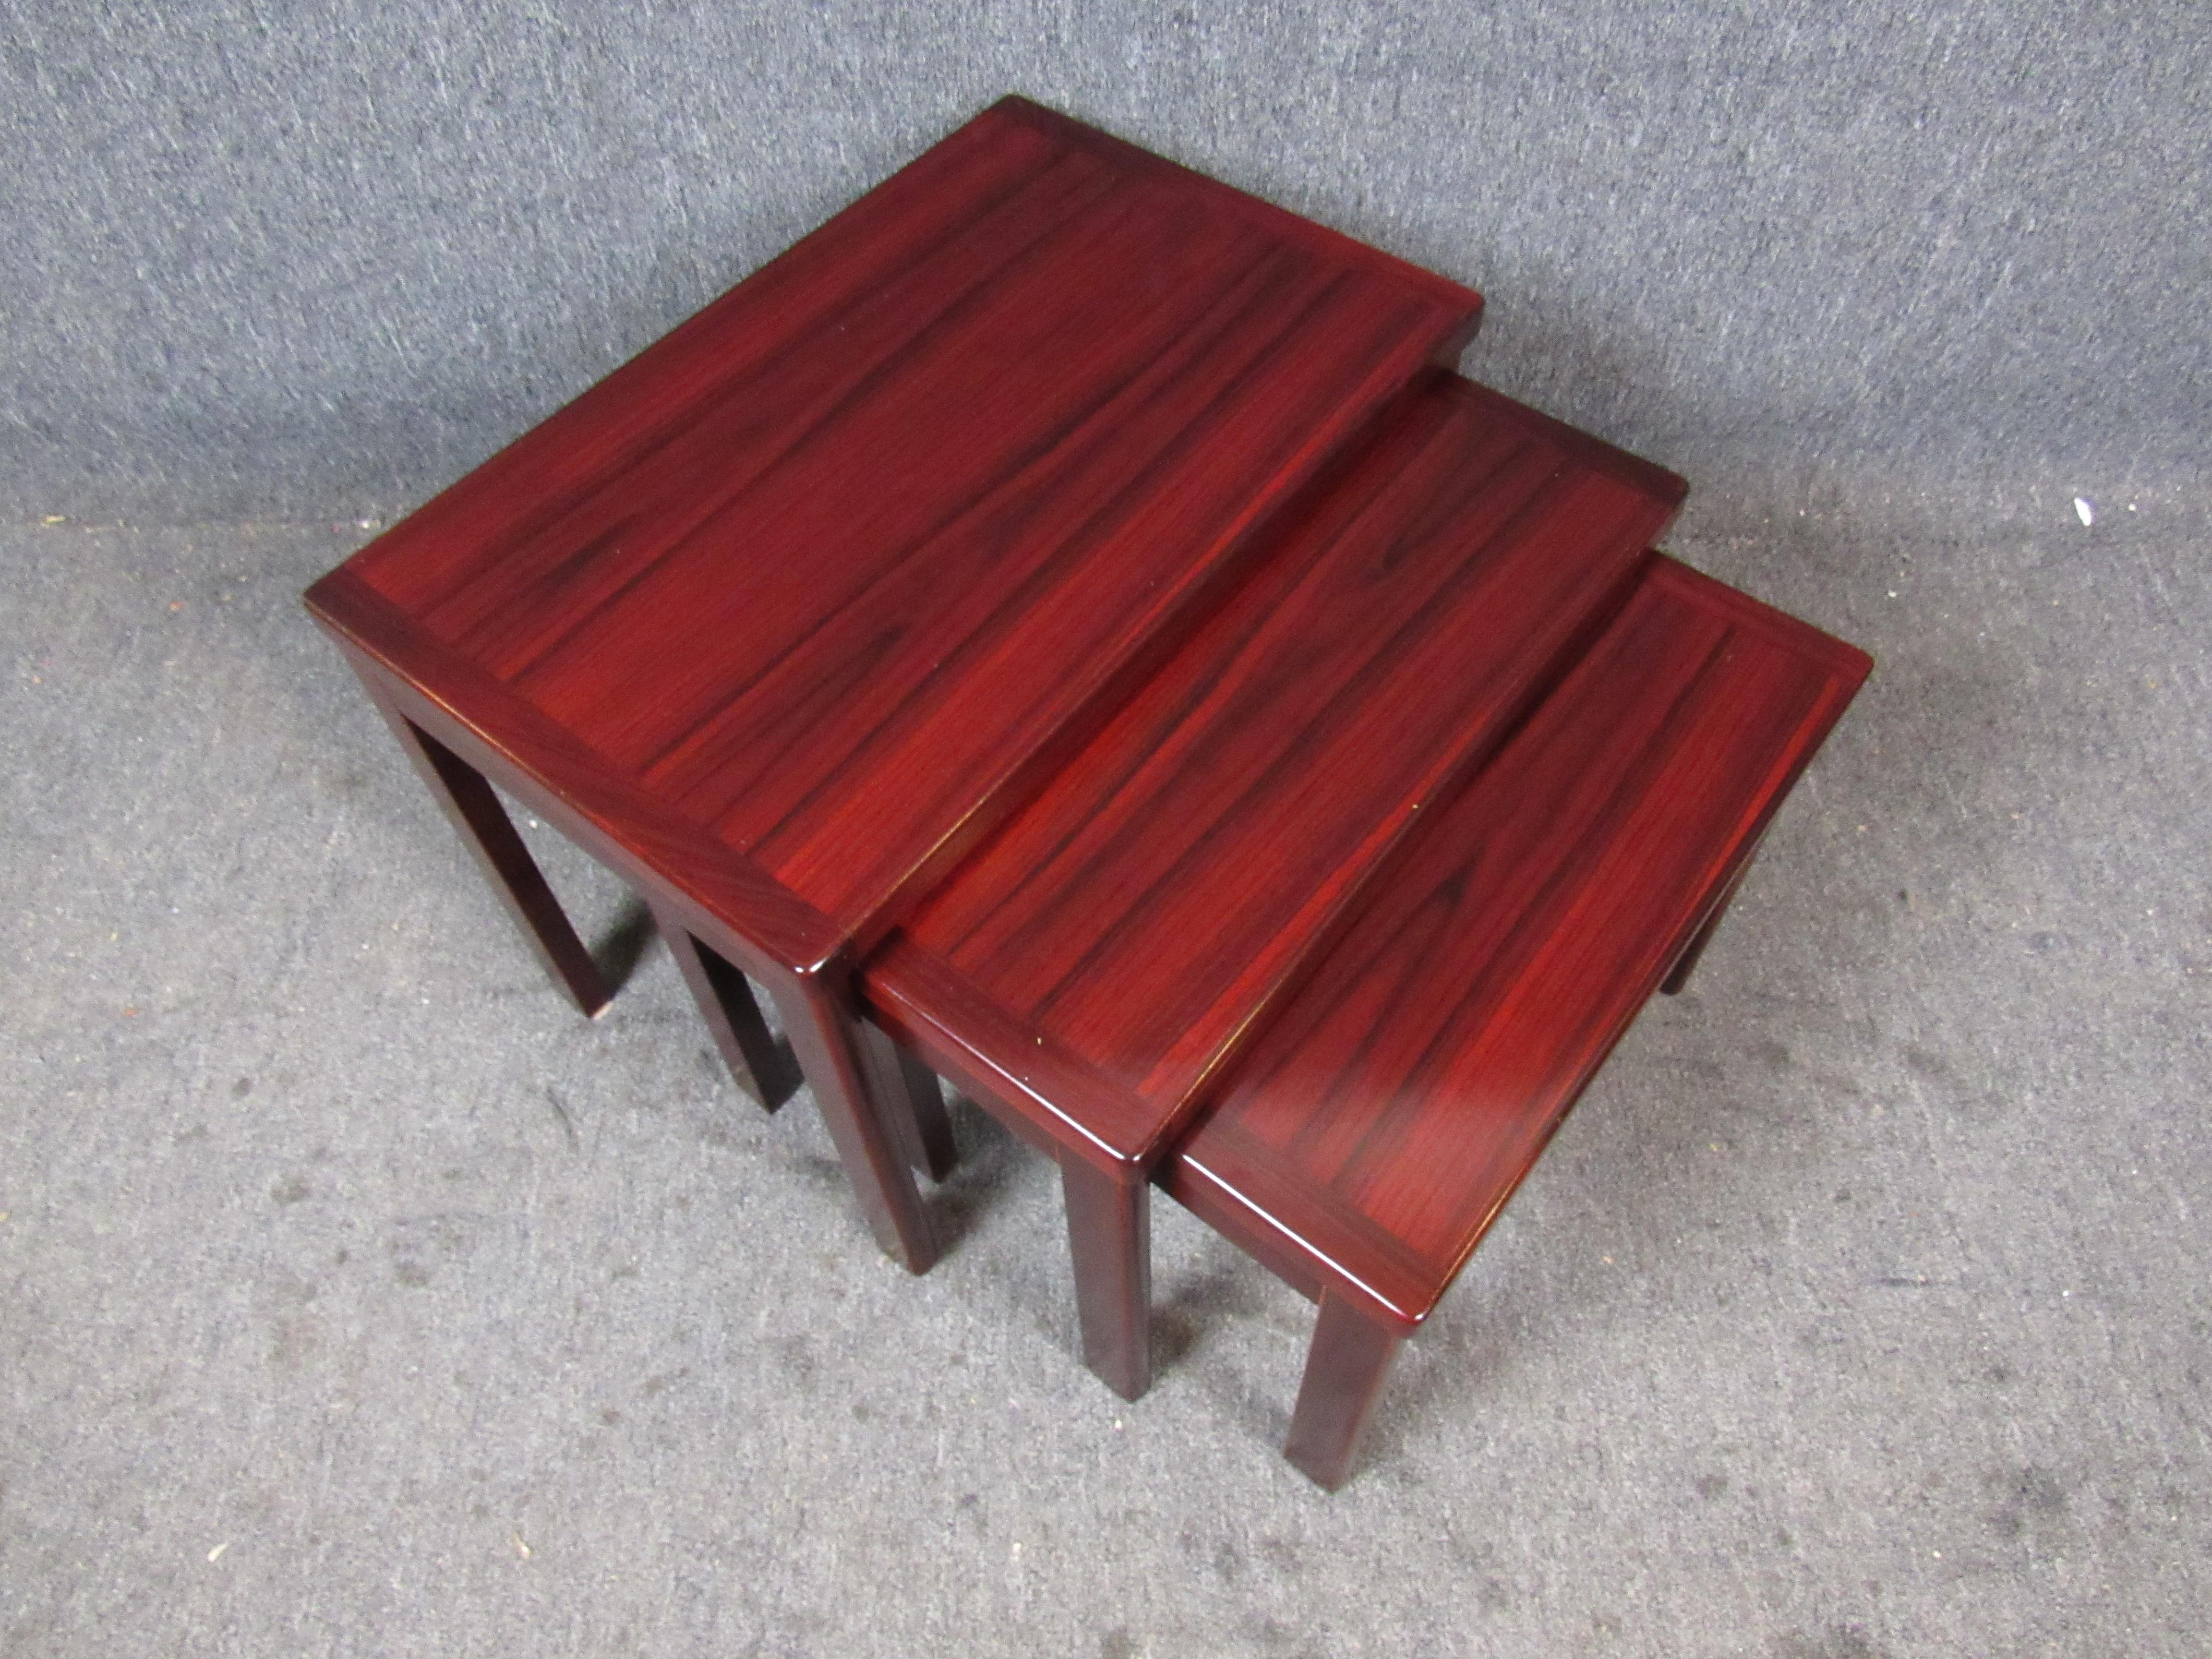 Absolutely stunning set of three rosewood nesting tables by V.S.M. Denmark. Each table proudly displays the beautiful deep, red grains that make this wood so desirable. Authentic Danish craftsmanship ensures sturdiness for years to come. Large table